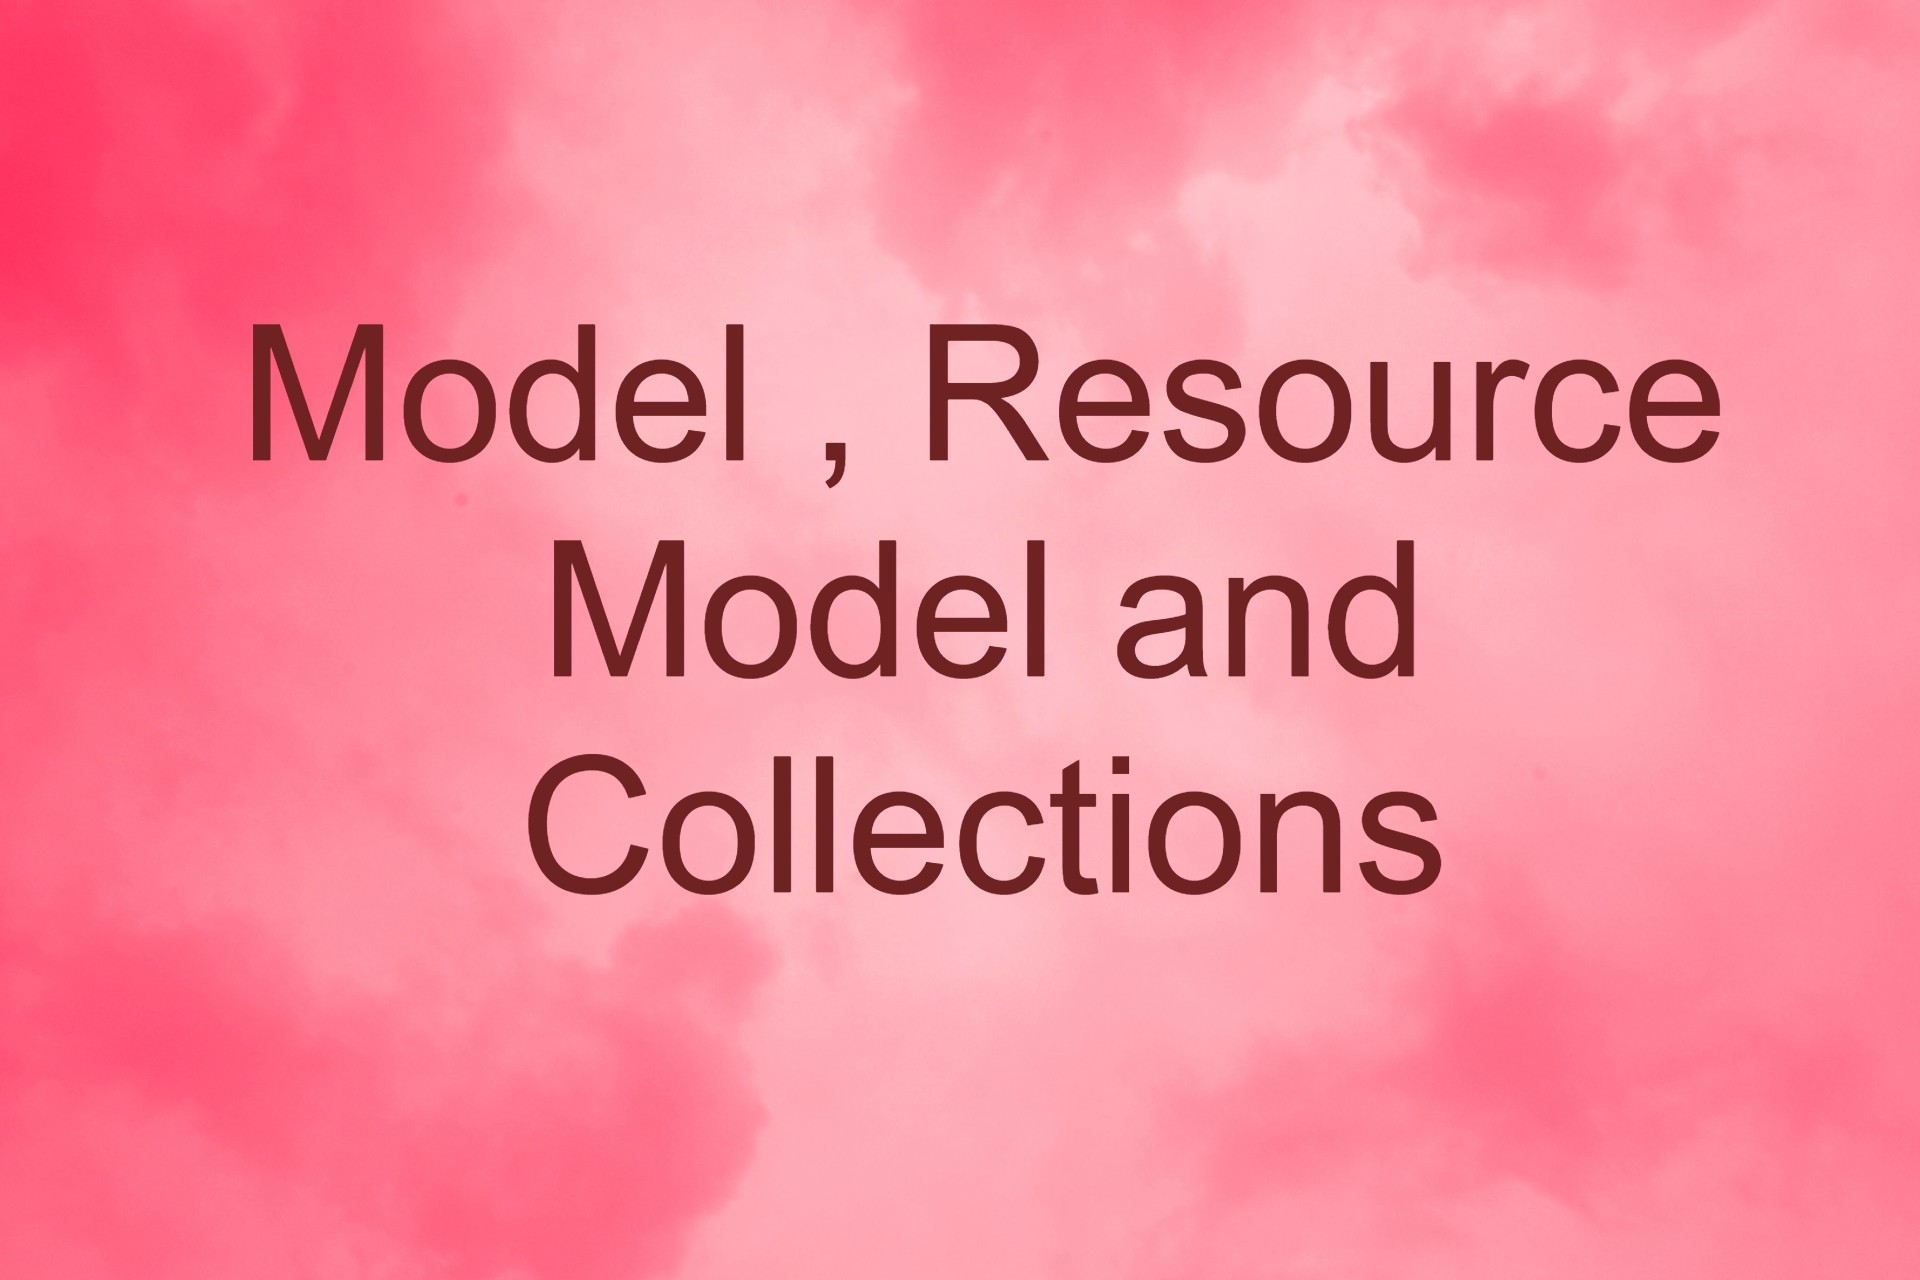 Model, Resource Model and Collections